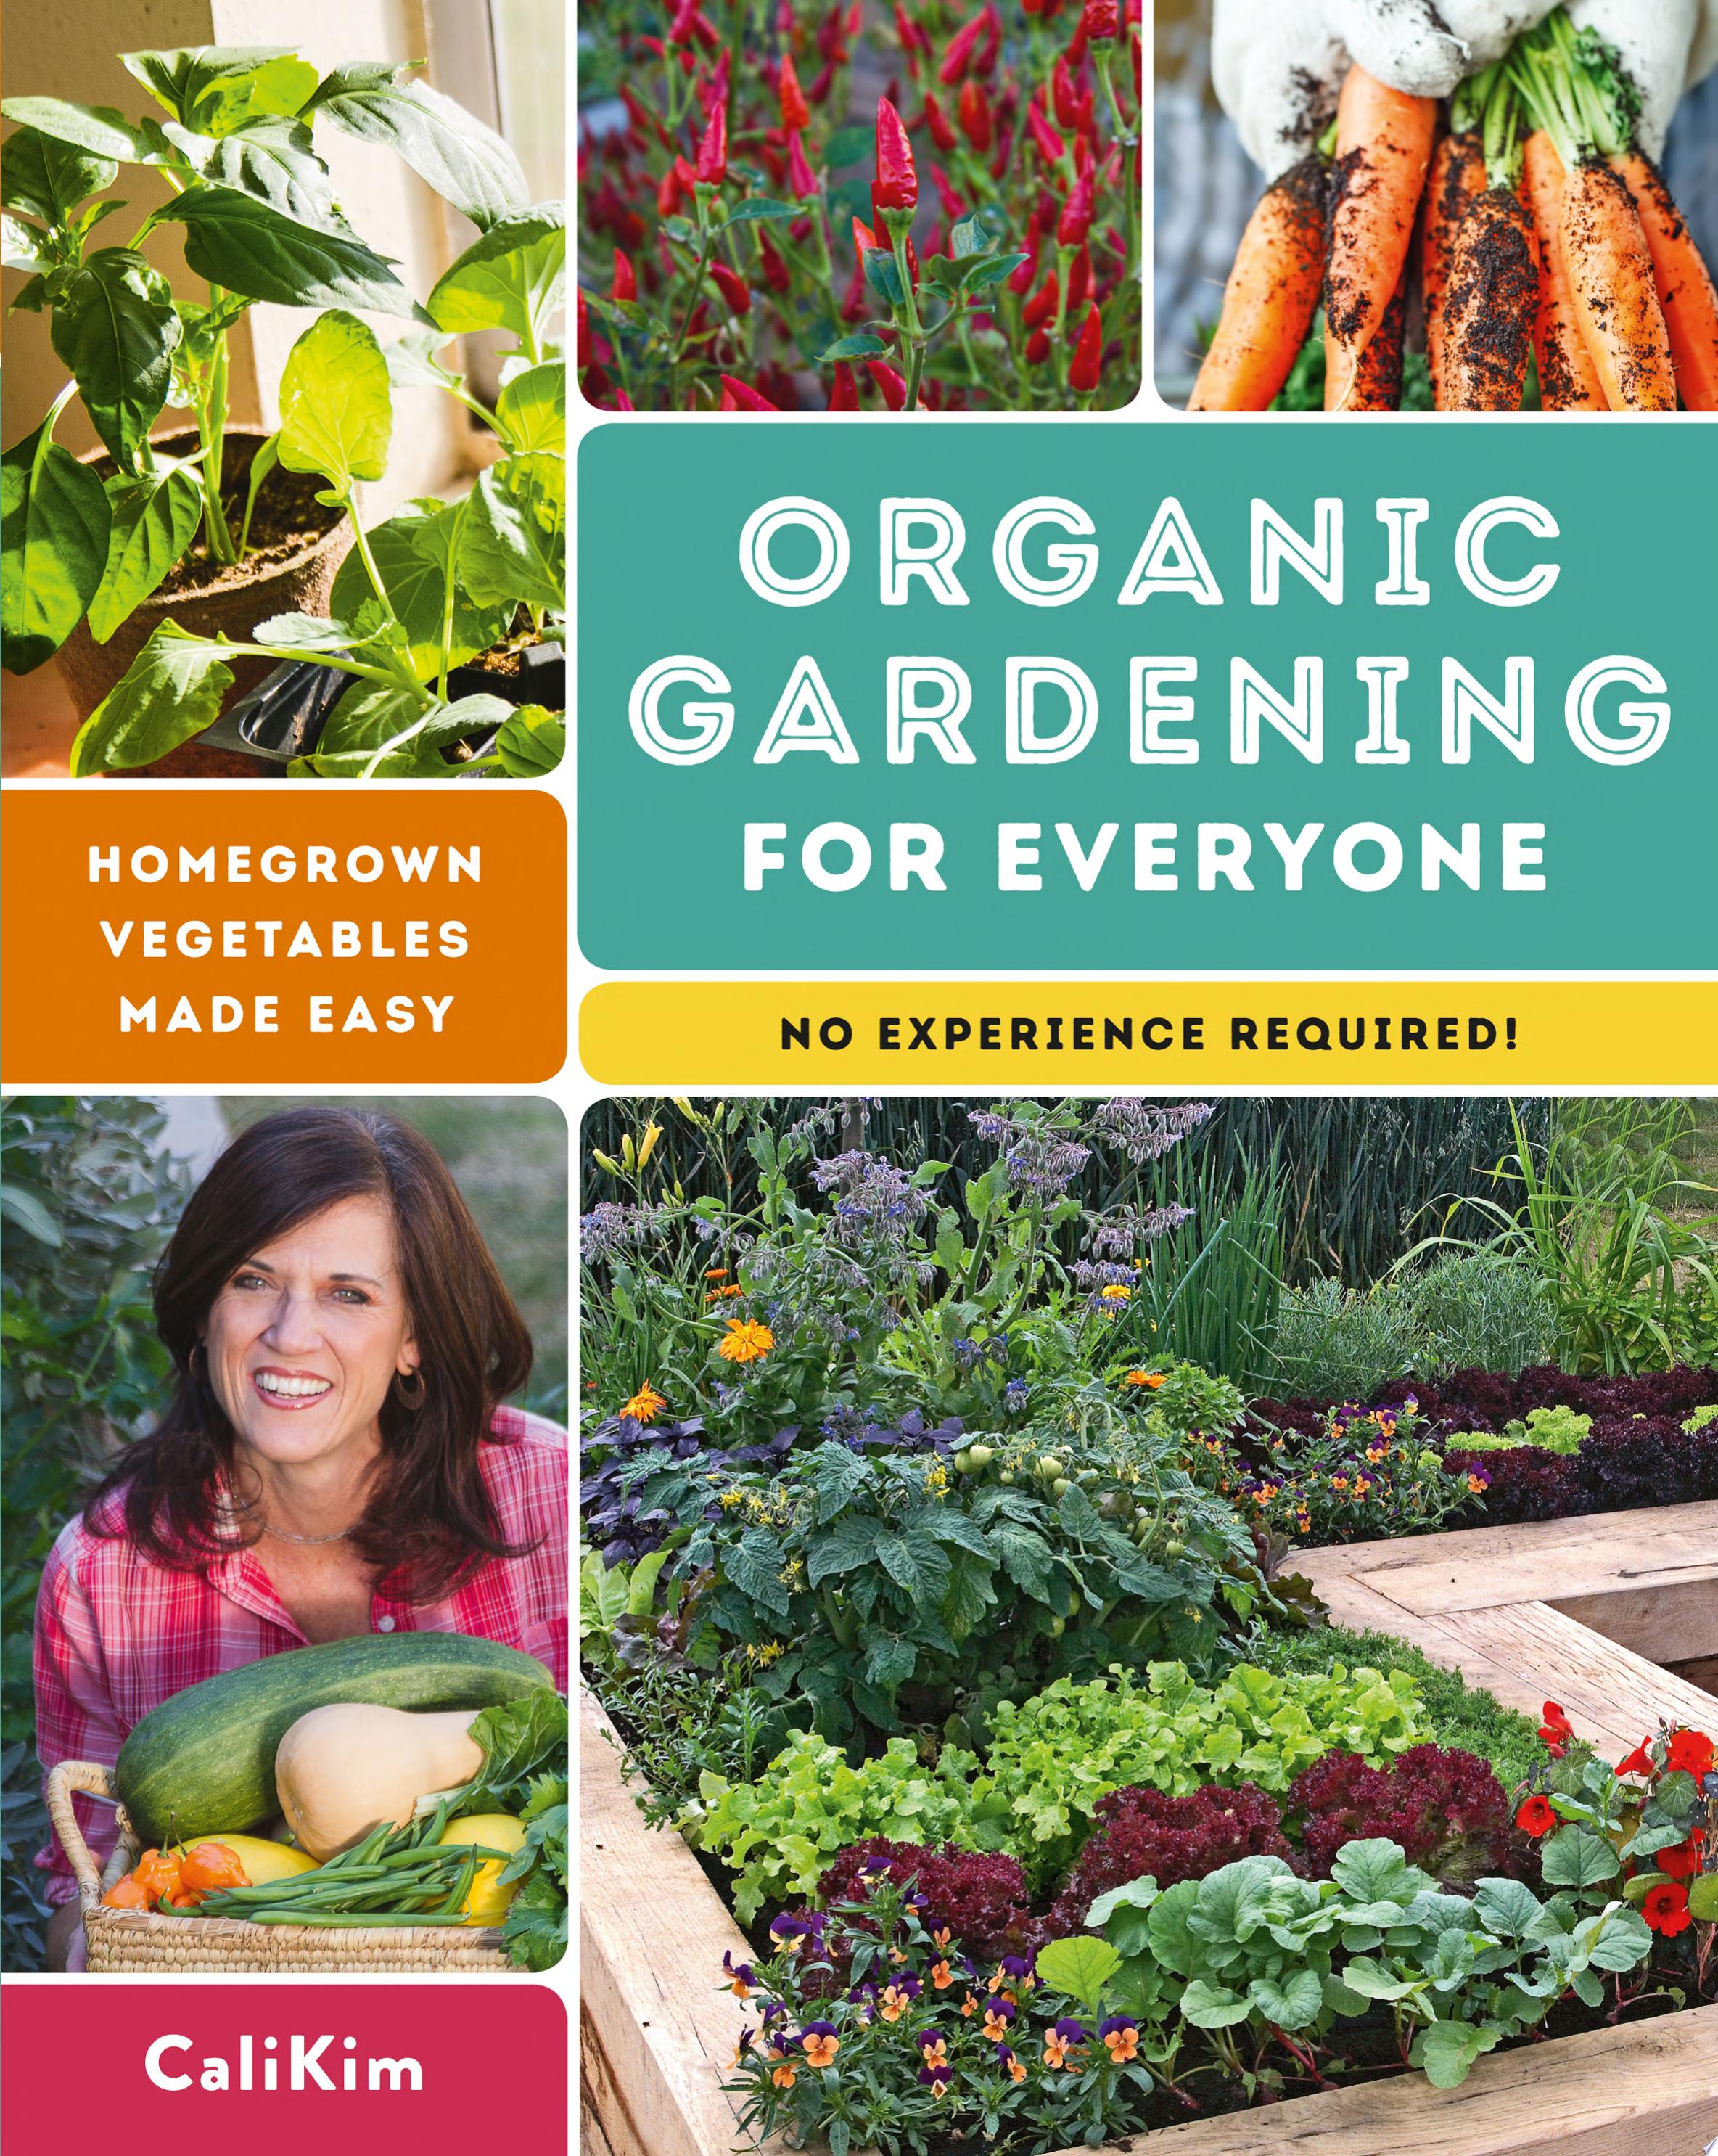 Image for "Organic Gardening for Everyone"